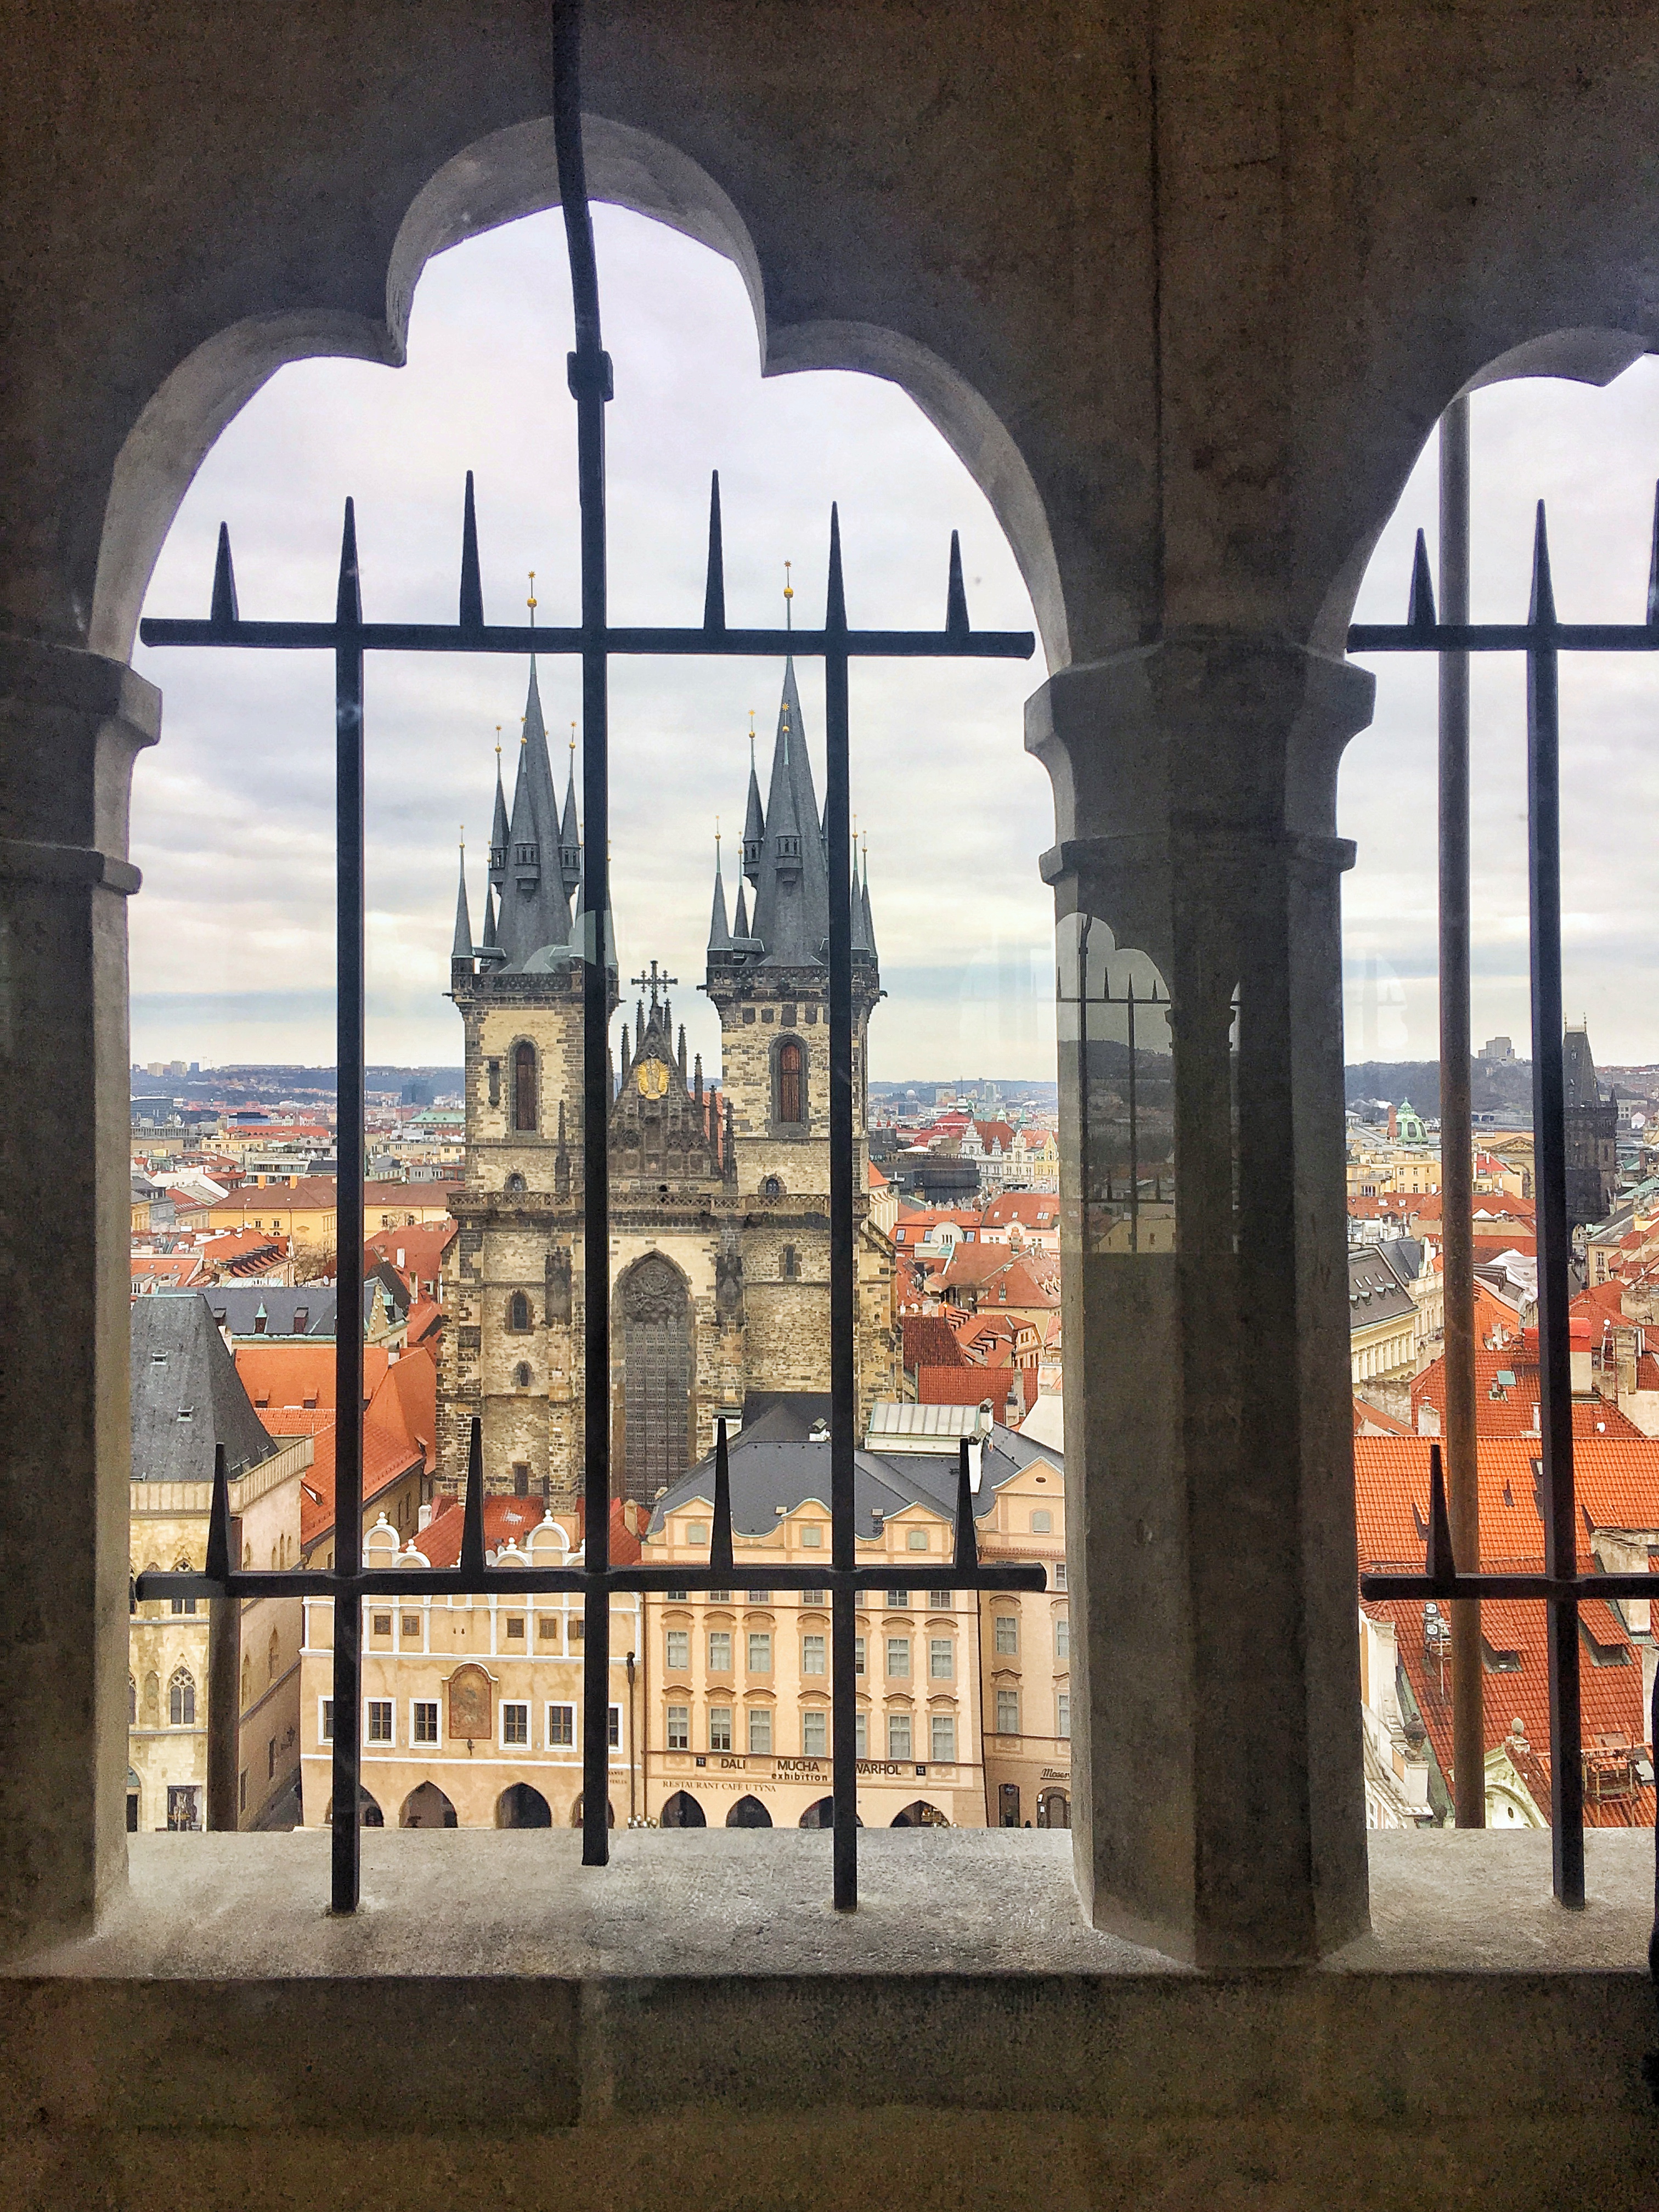 Views of Old Town Square in Prague